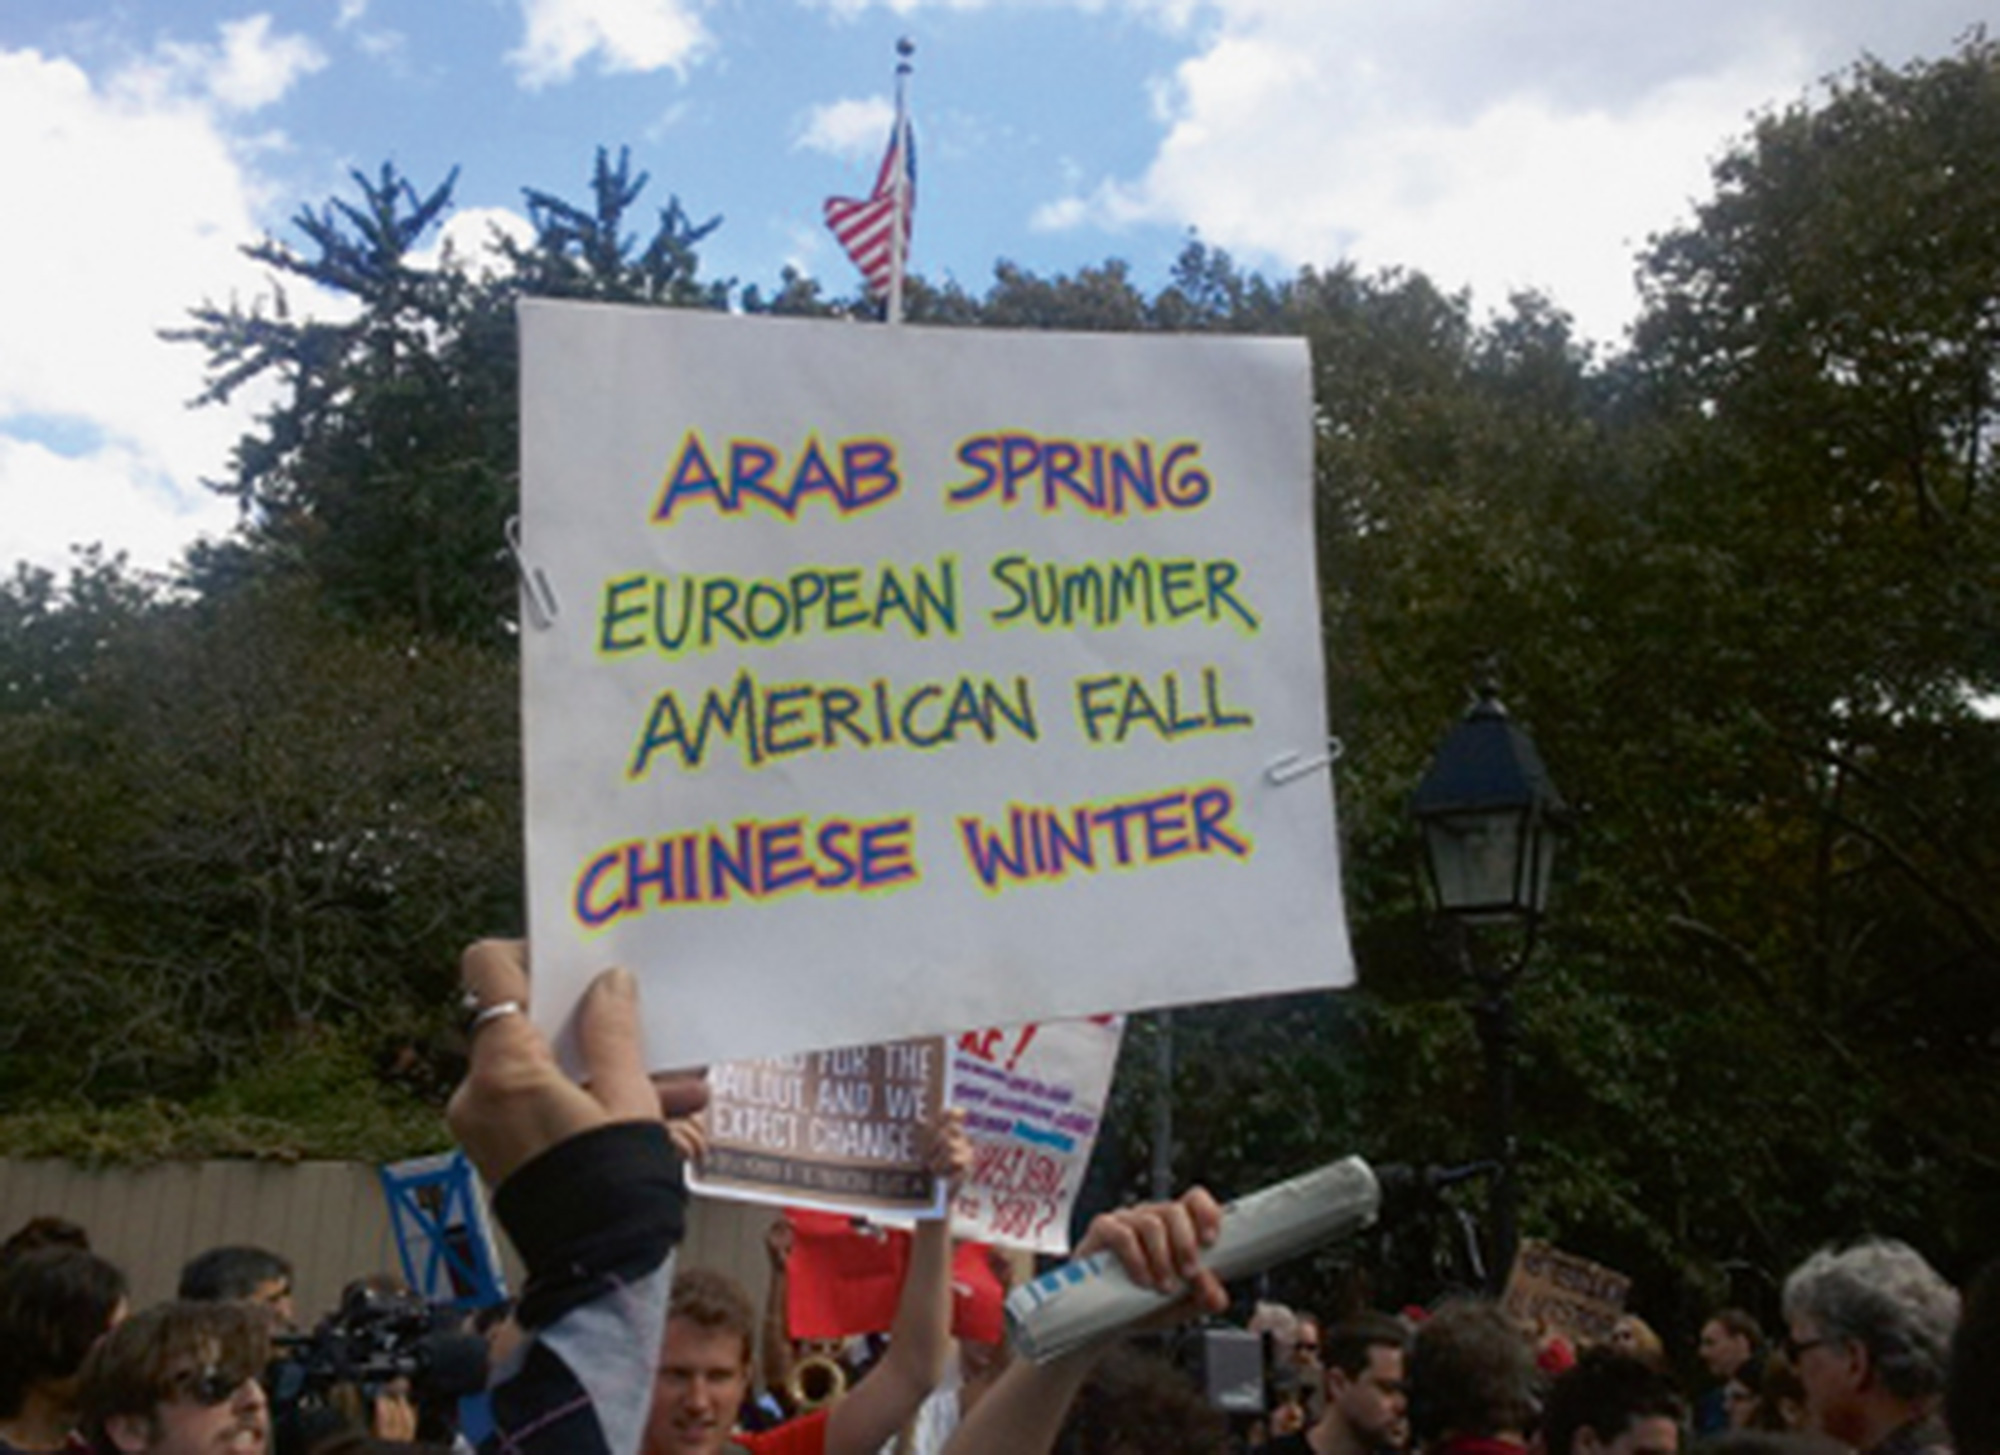 A twenty eleven photograph of a protest sign that reads “Arab Spring, European Summer, American Fall, Chinese Winter.”